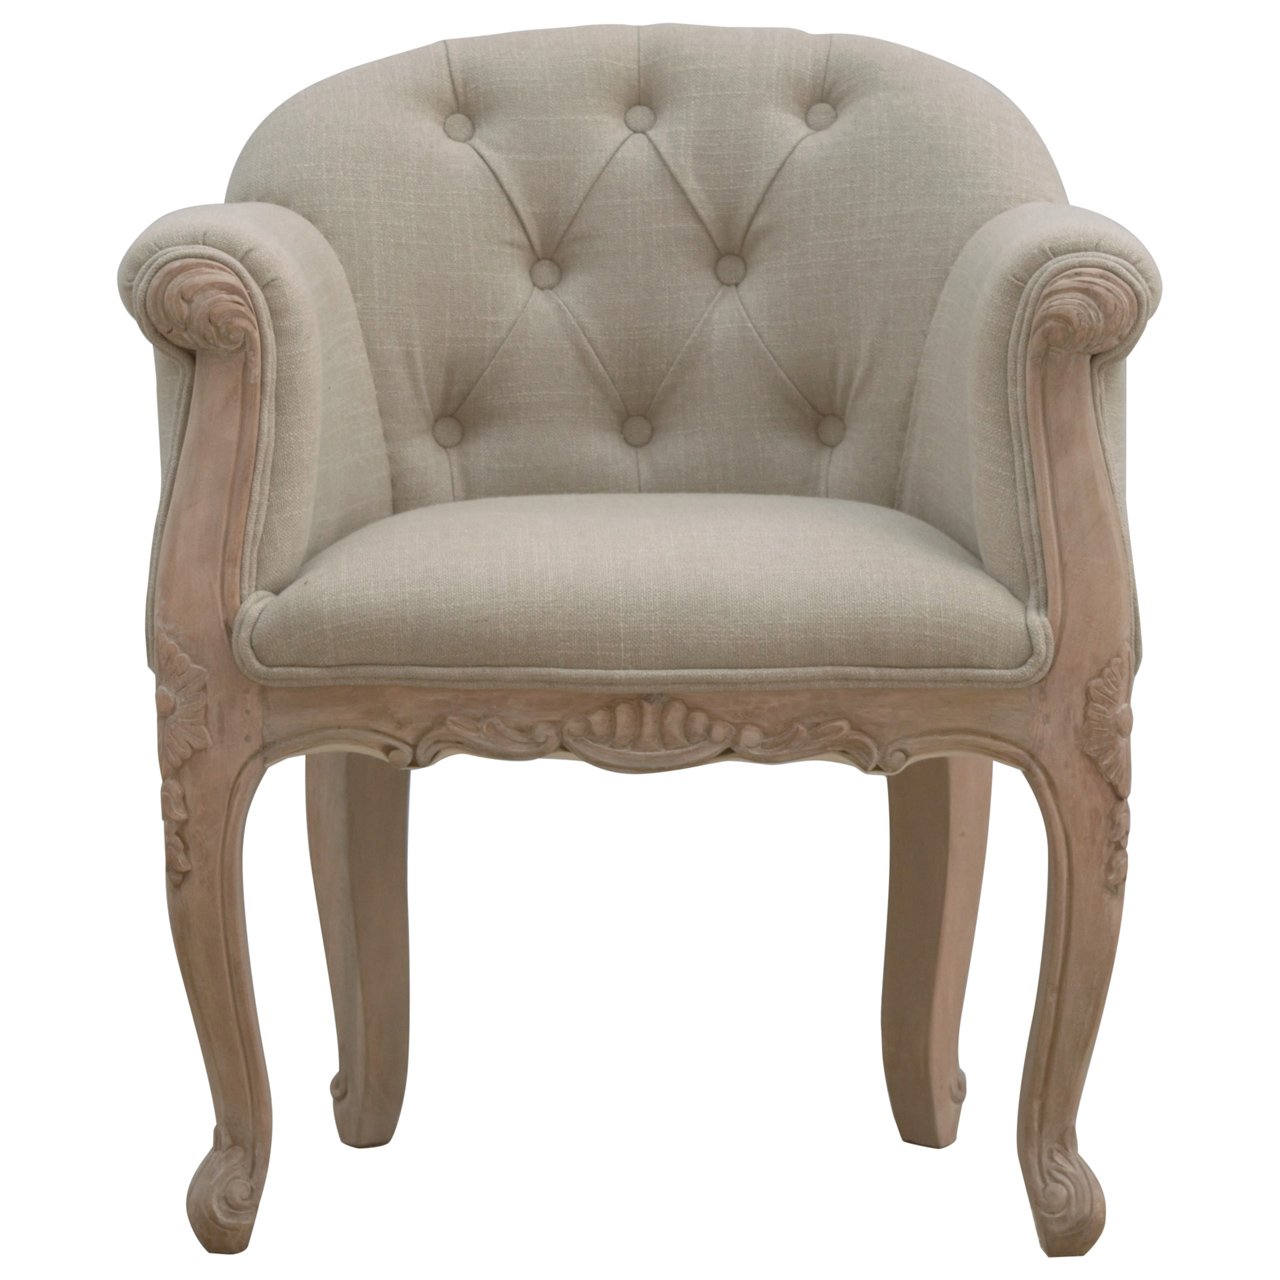 View French Style Deep Button Chair information